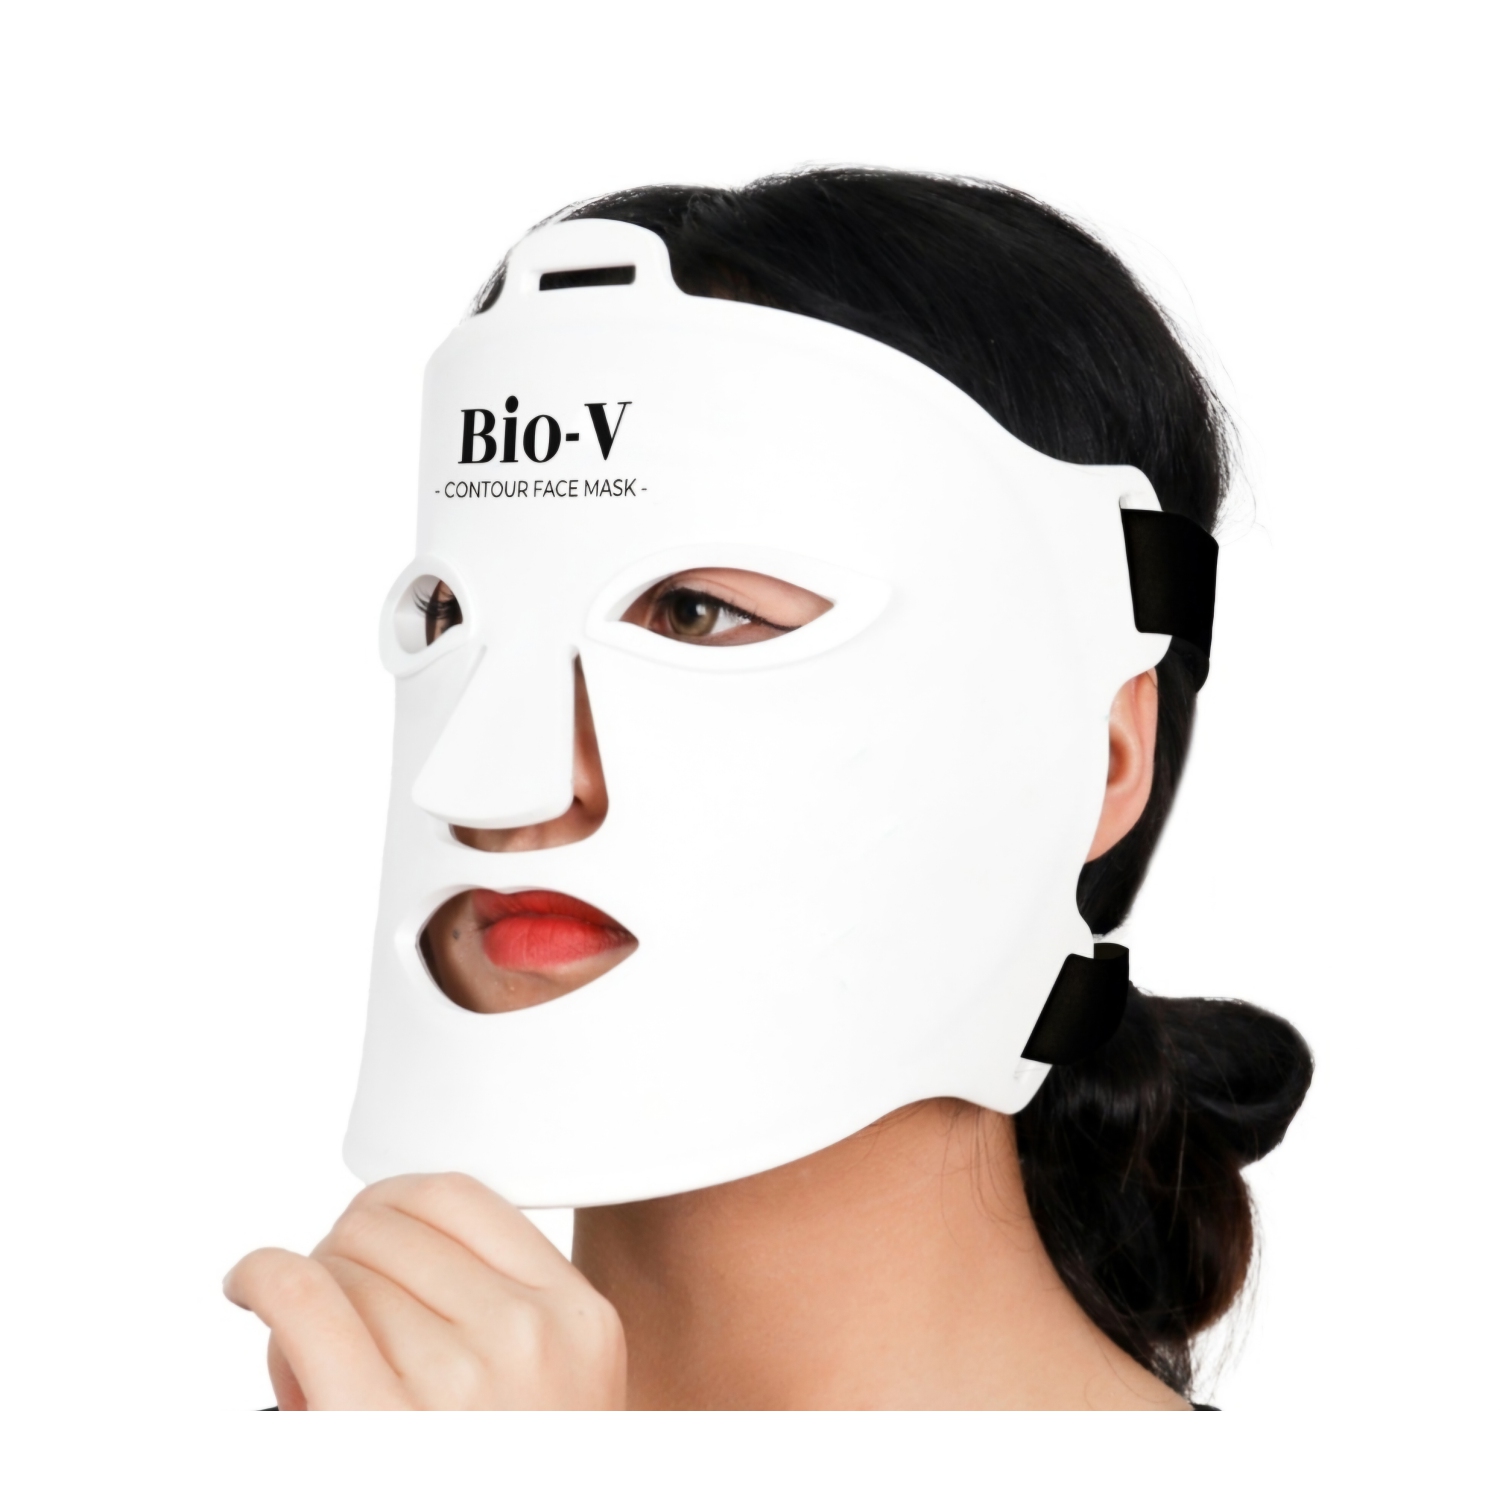 Bio-V Contour LED Face Mask - 4 Color LED Light Therapy for Face with Near Infrared 850nm Red Light Mask for Anti Aging, Wrinkles, Acne, Skin Tone and Healthy Glowing Skin